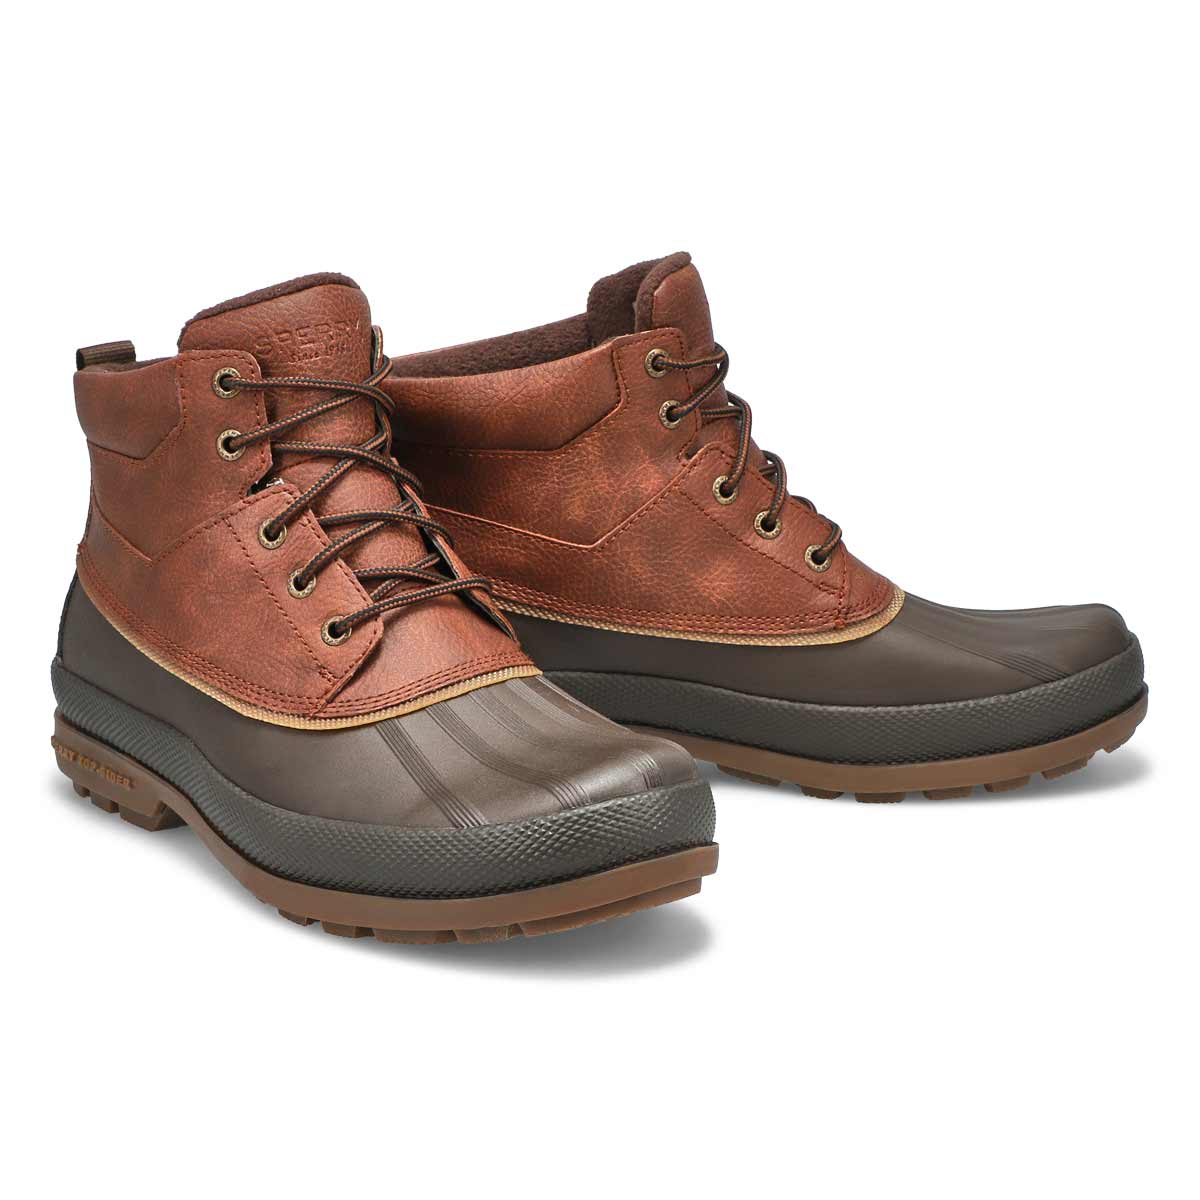 Sperry Top-Sider Mens Cold Bay Chukka Boots 